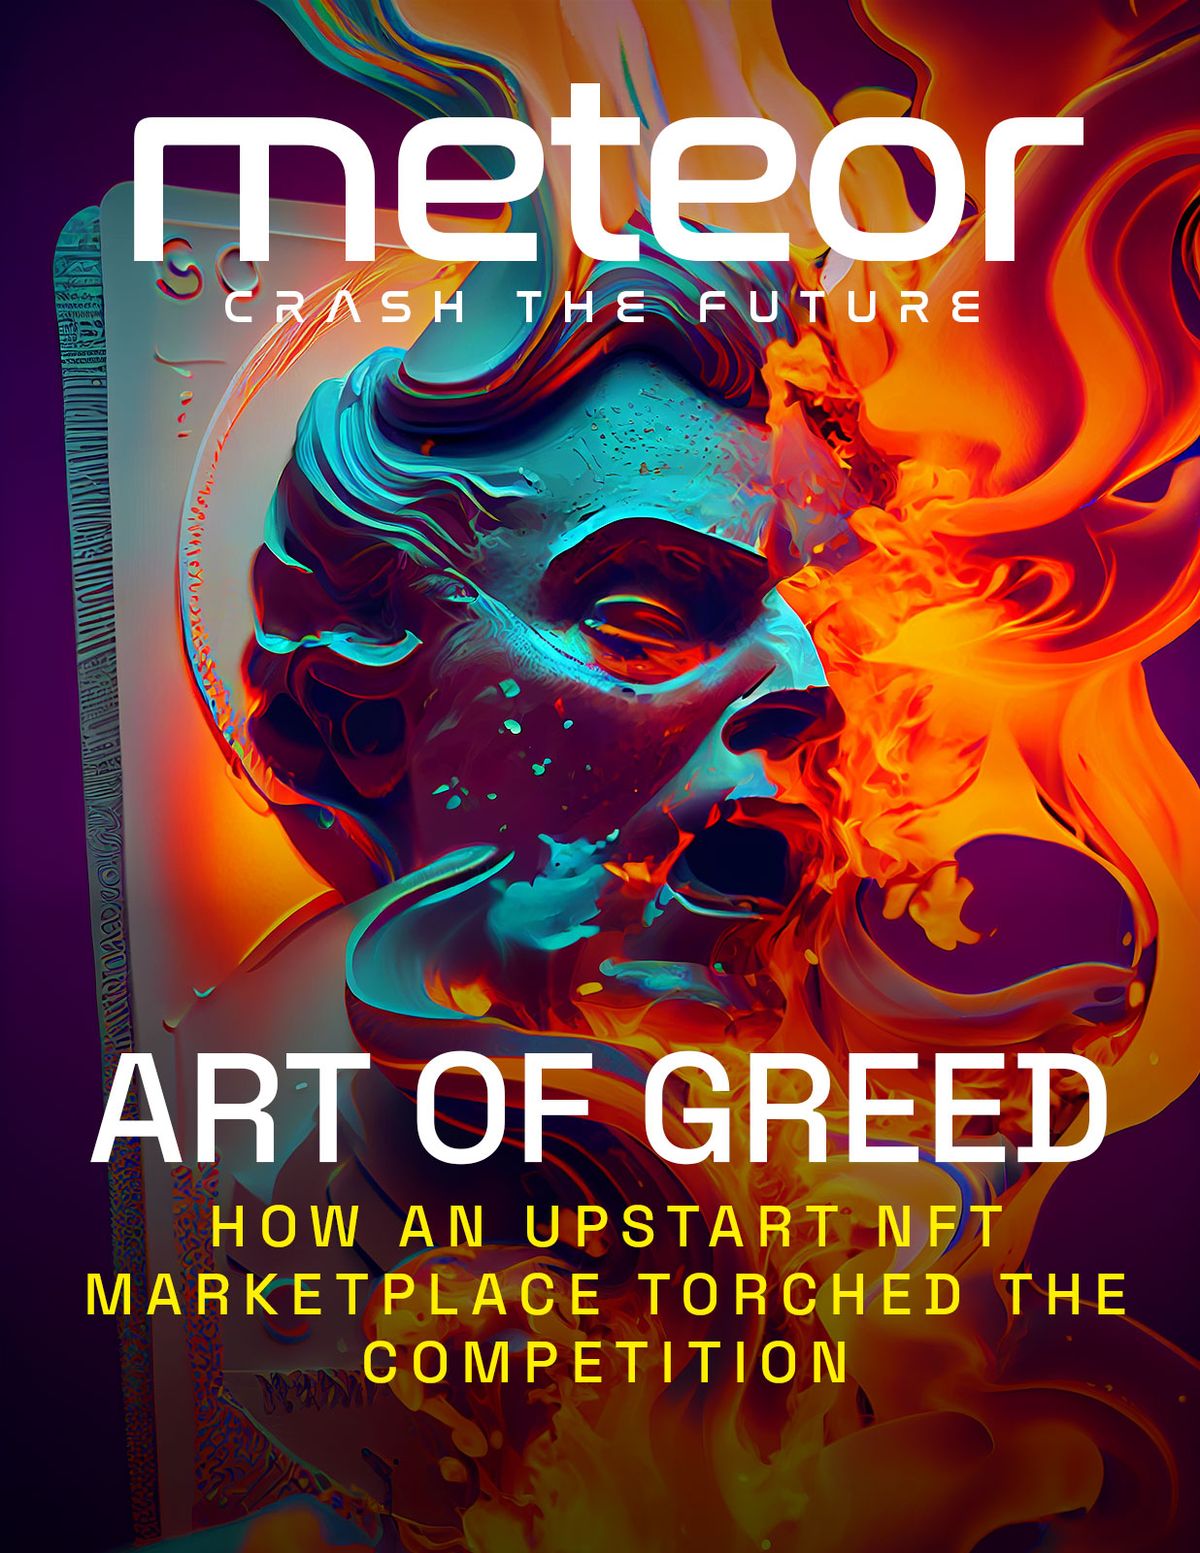 The Art of Greed